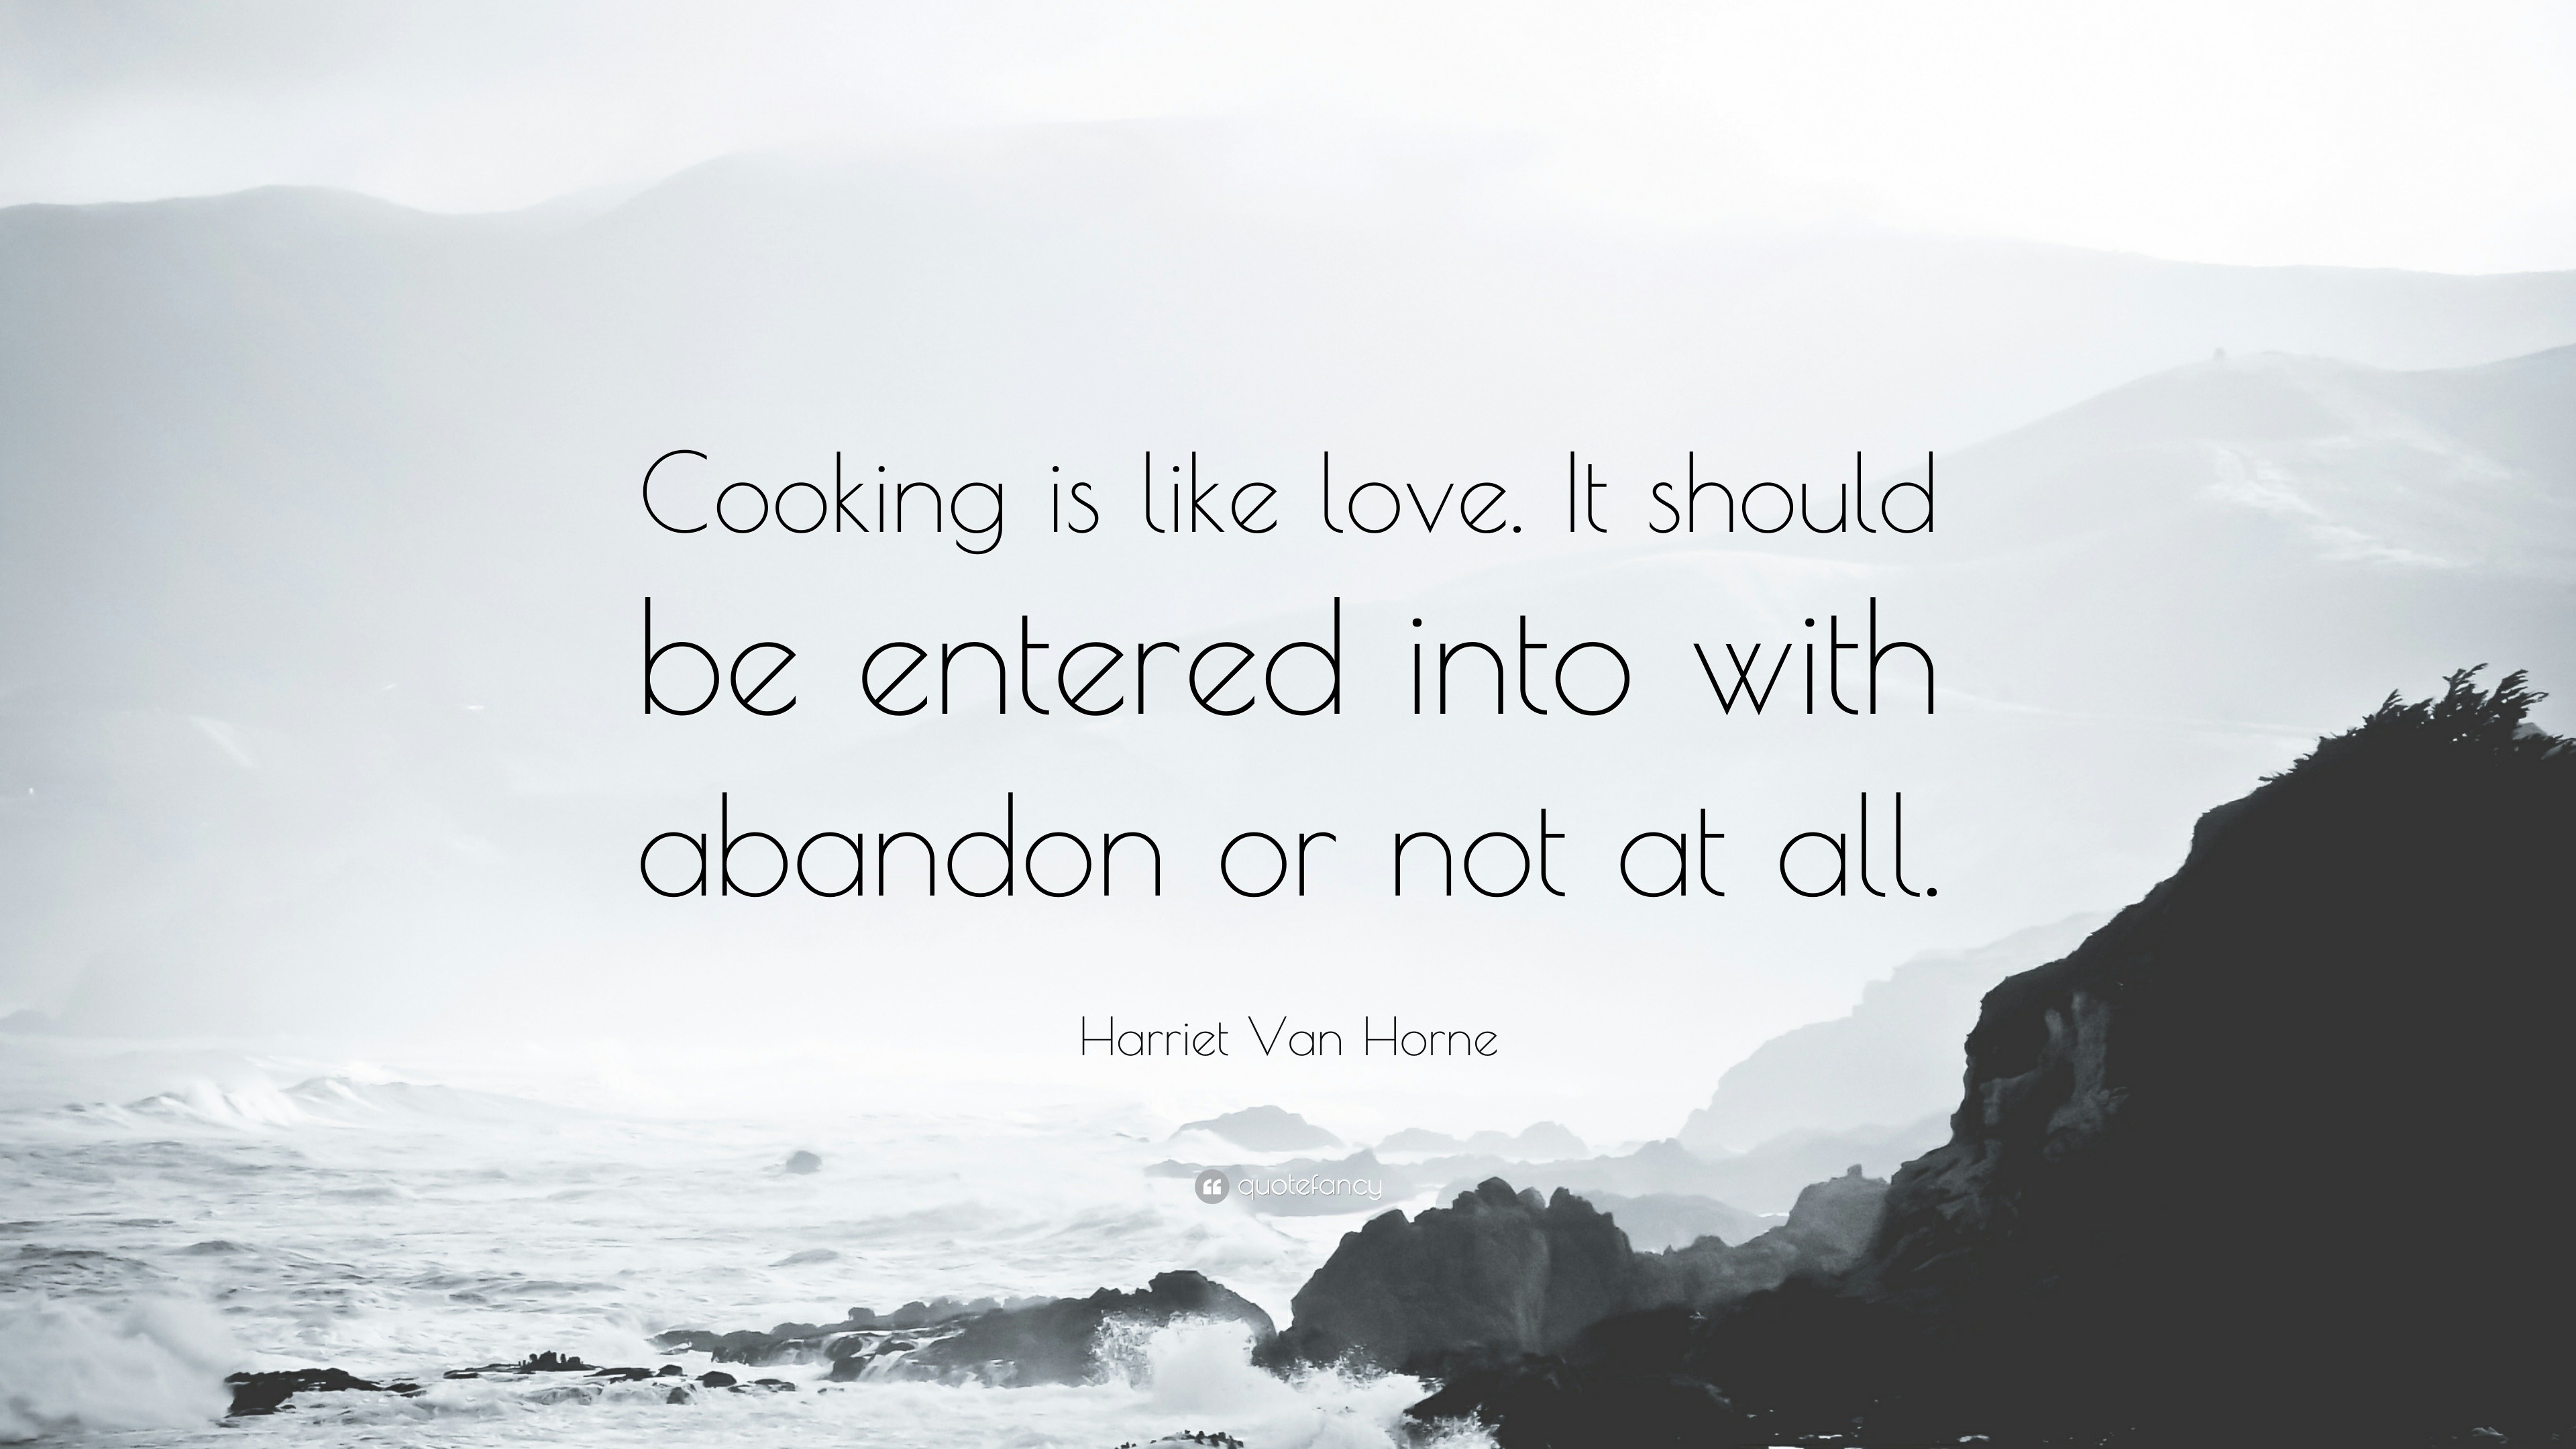 Harriet Van Horne Quote “Cooking is like love It should be entered into